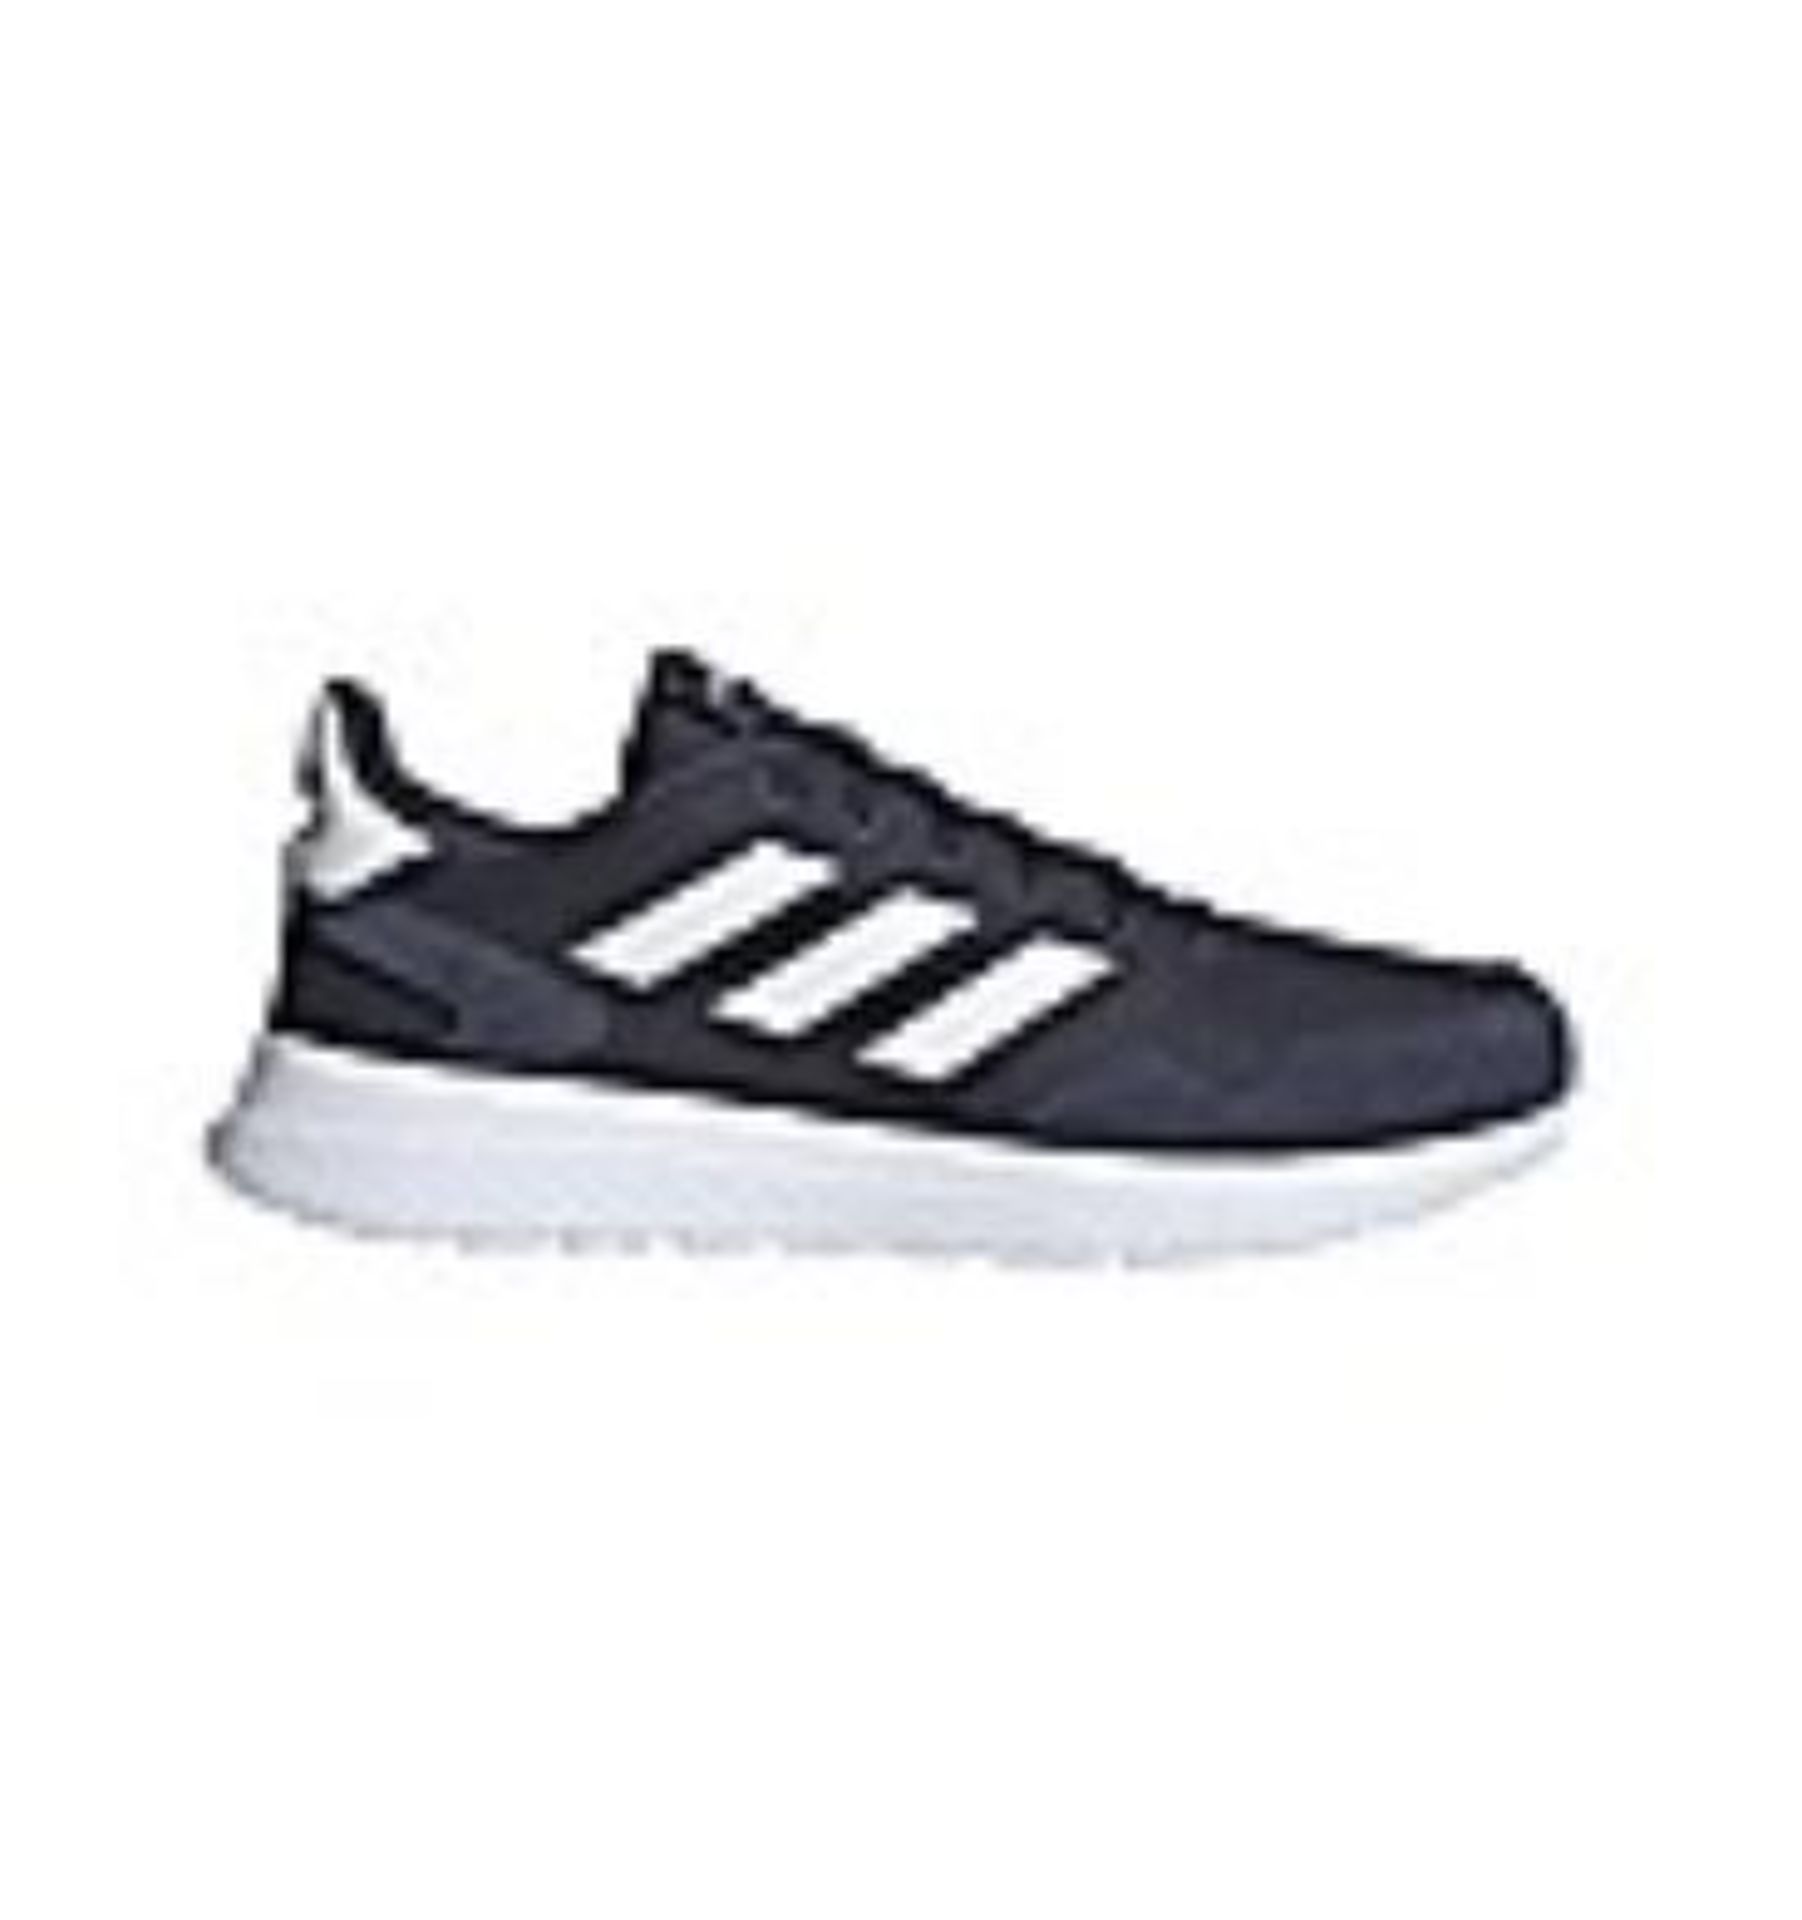 + VAT Brand New Pair Gents Adidas Archivo Trainers Navy/White Size 6